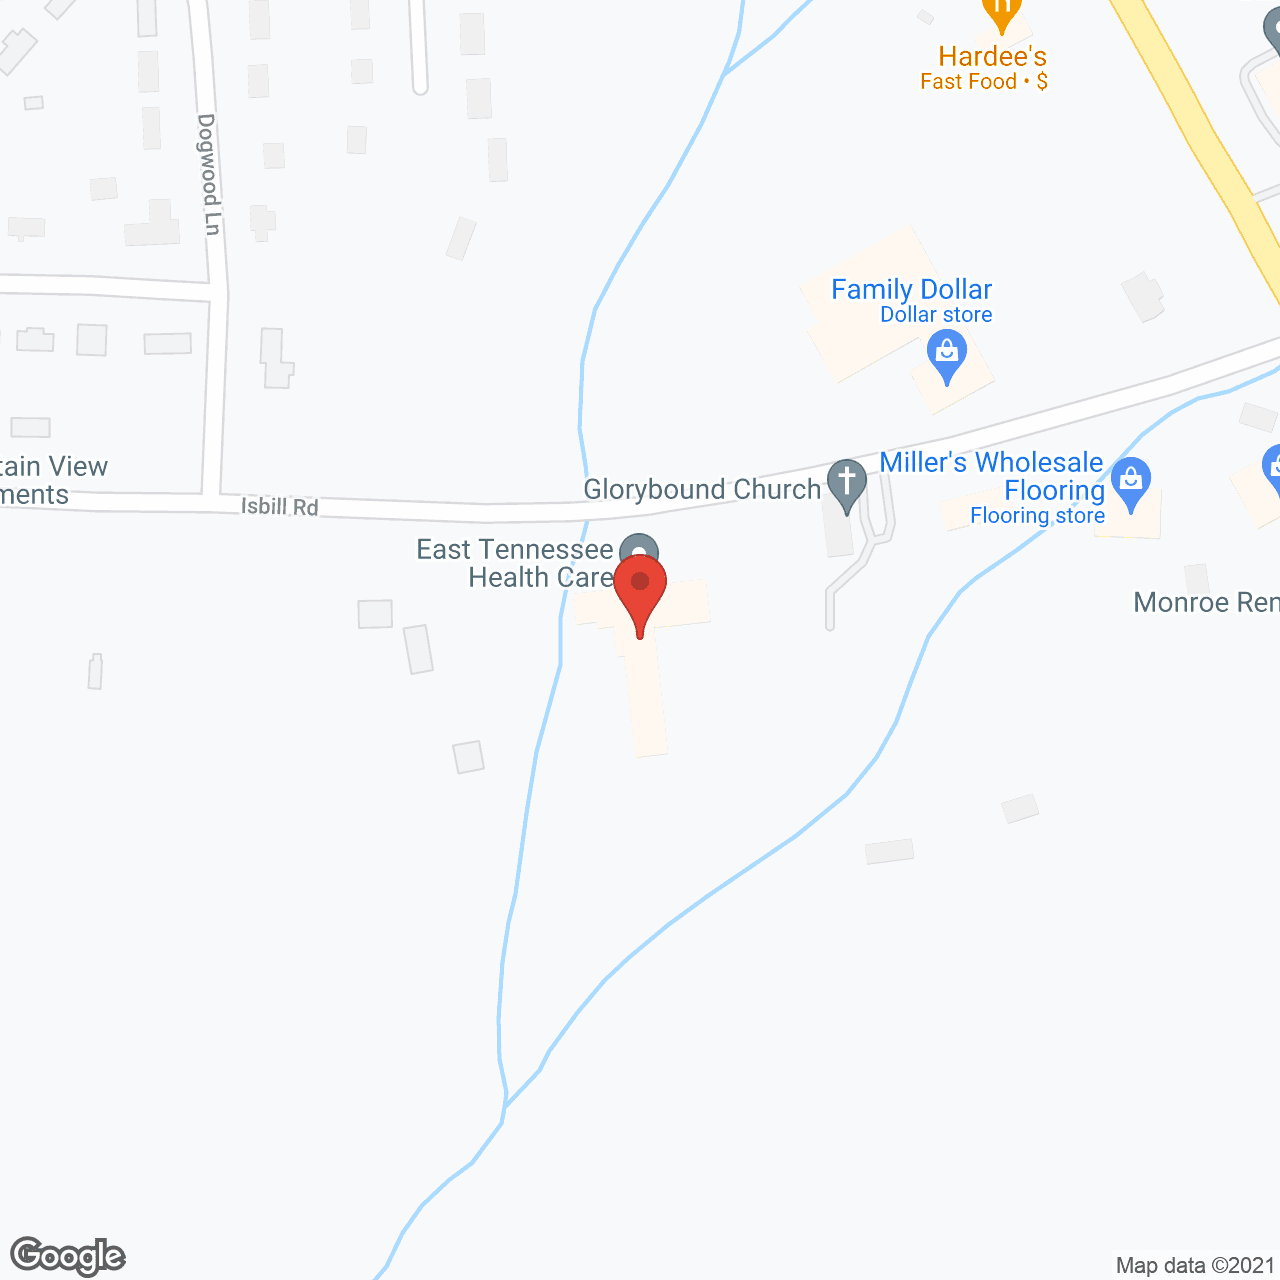 East Tennessee Health Care Center in google map